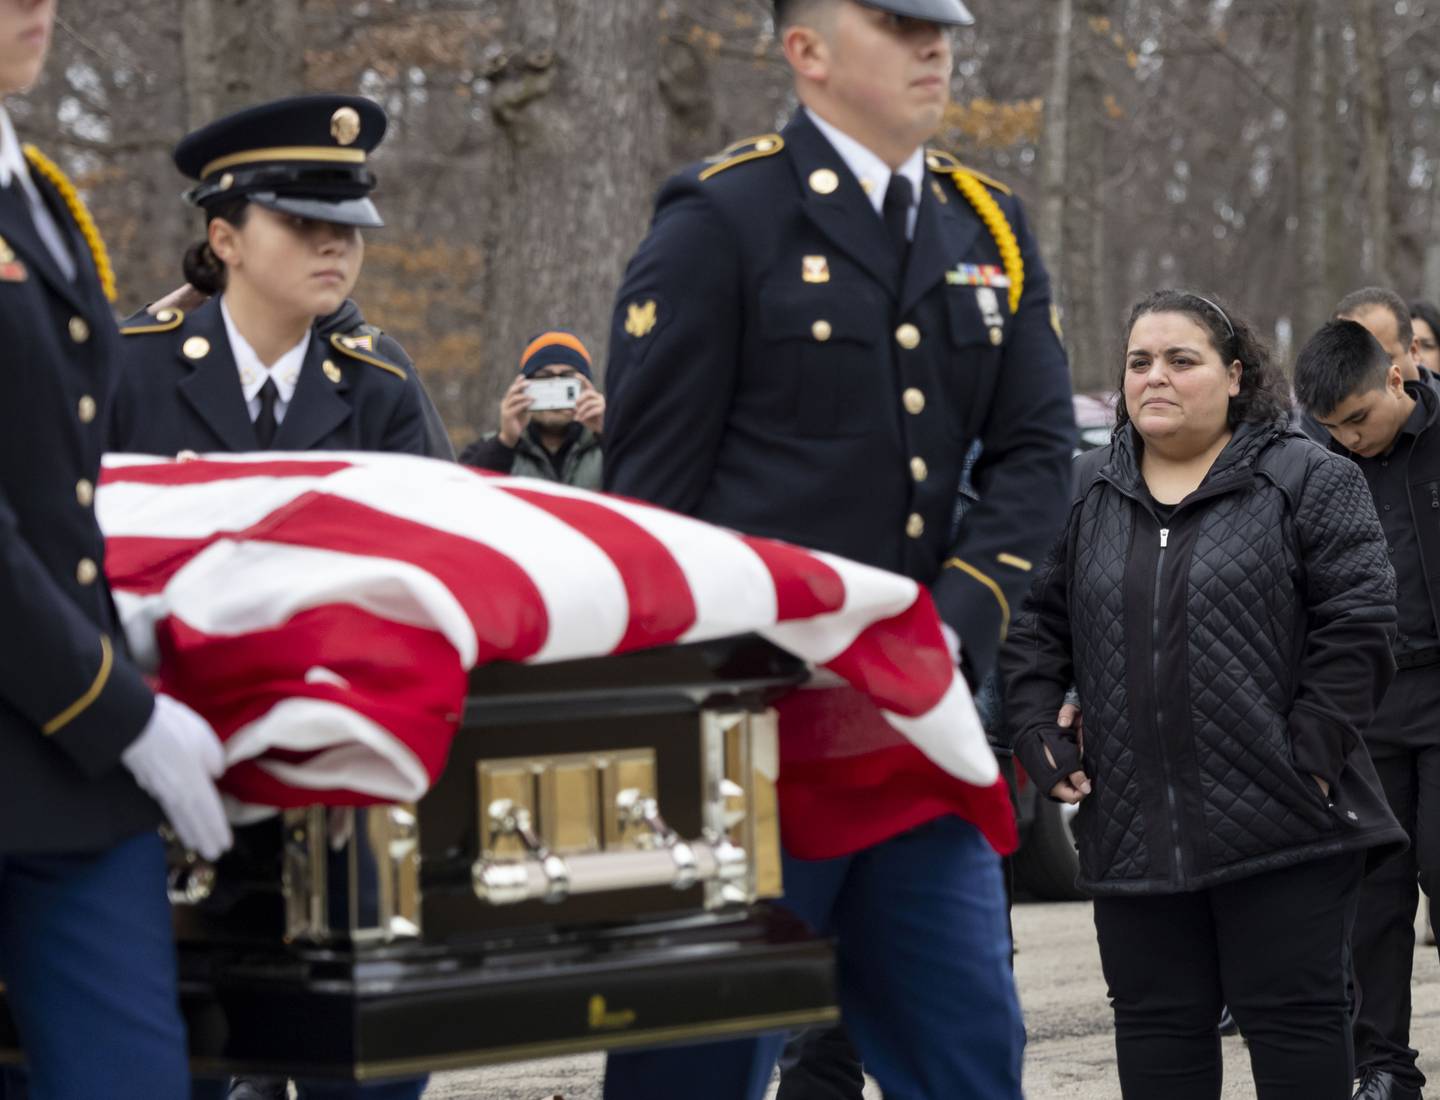 An honor guard carries the casket of former Army Sgt. Joel Gomez while sister Noemi Sanchez watches during funeral services at Abraham Lincoln National Cemetery on Tuesday, Nov. 29, 2022, in Elwood, Ill.